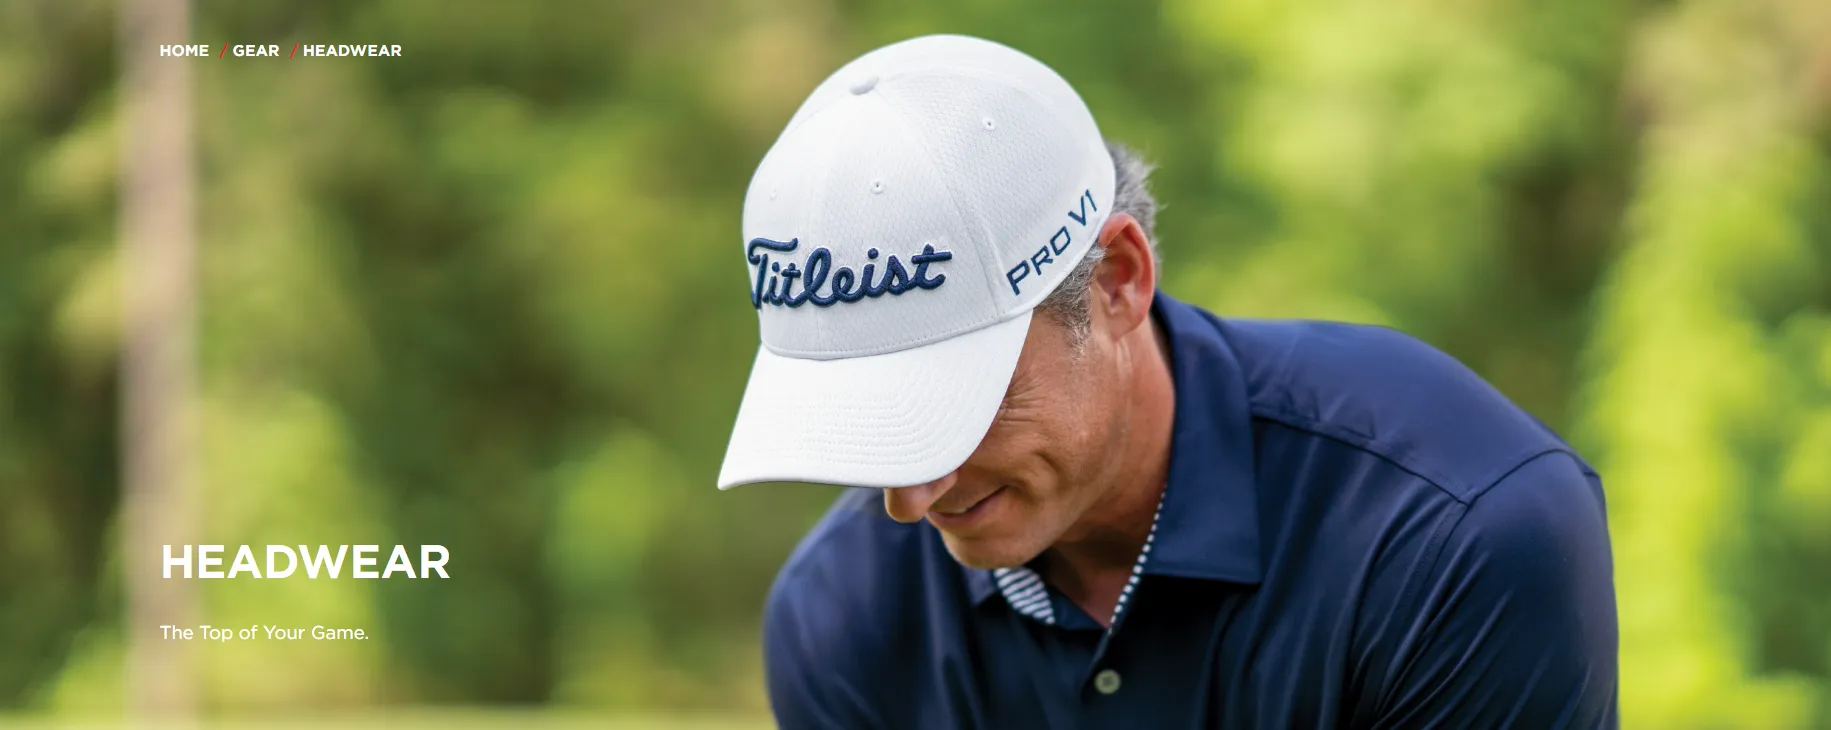 What is Titleist?